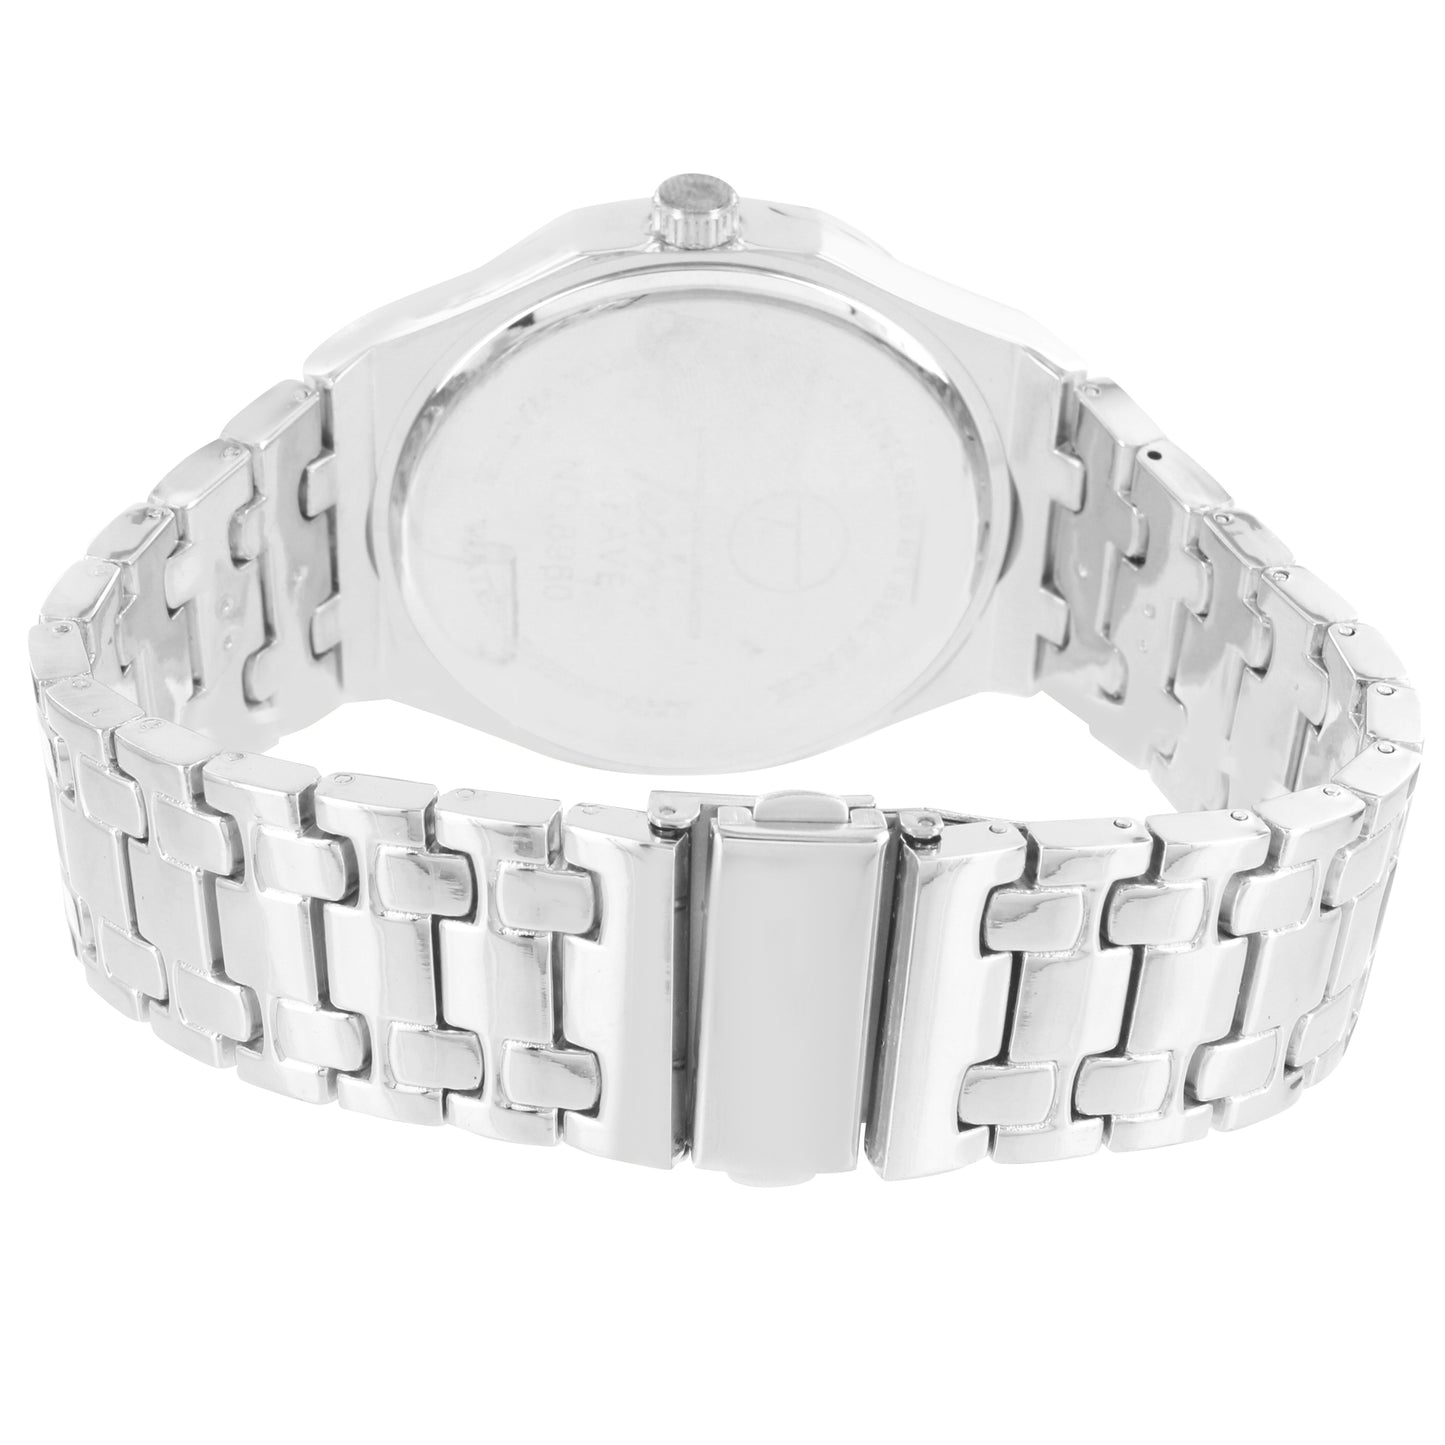 Men's Silver Tone Techno Pave Link Watch Chrome Finish Steel